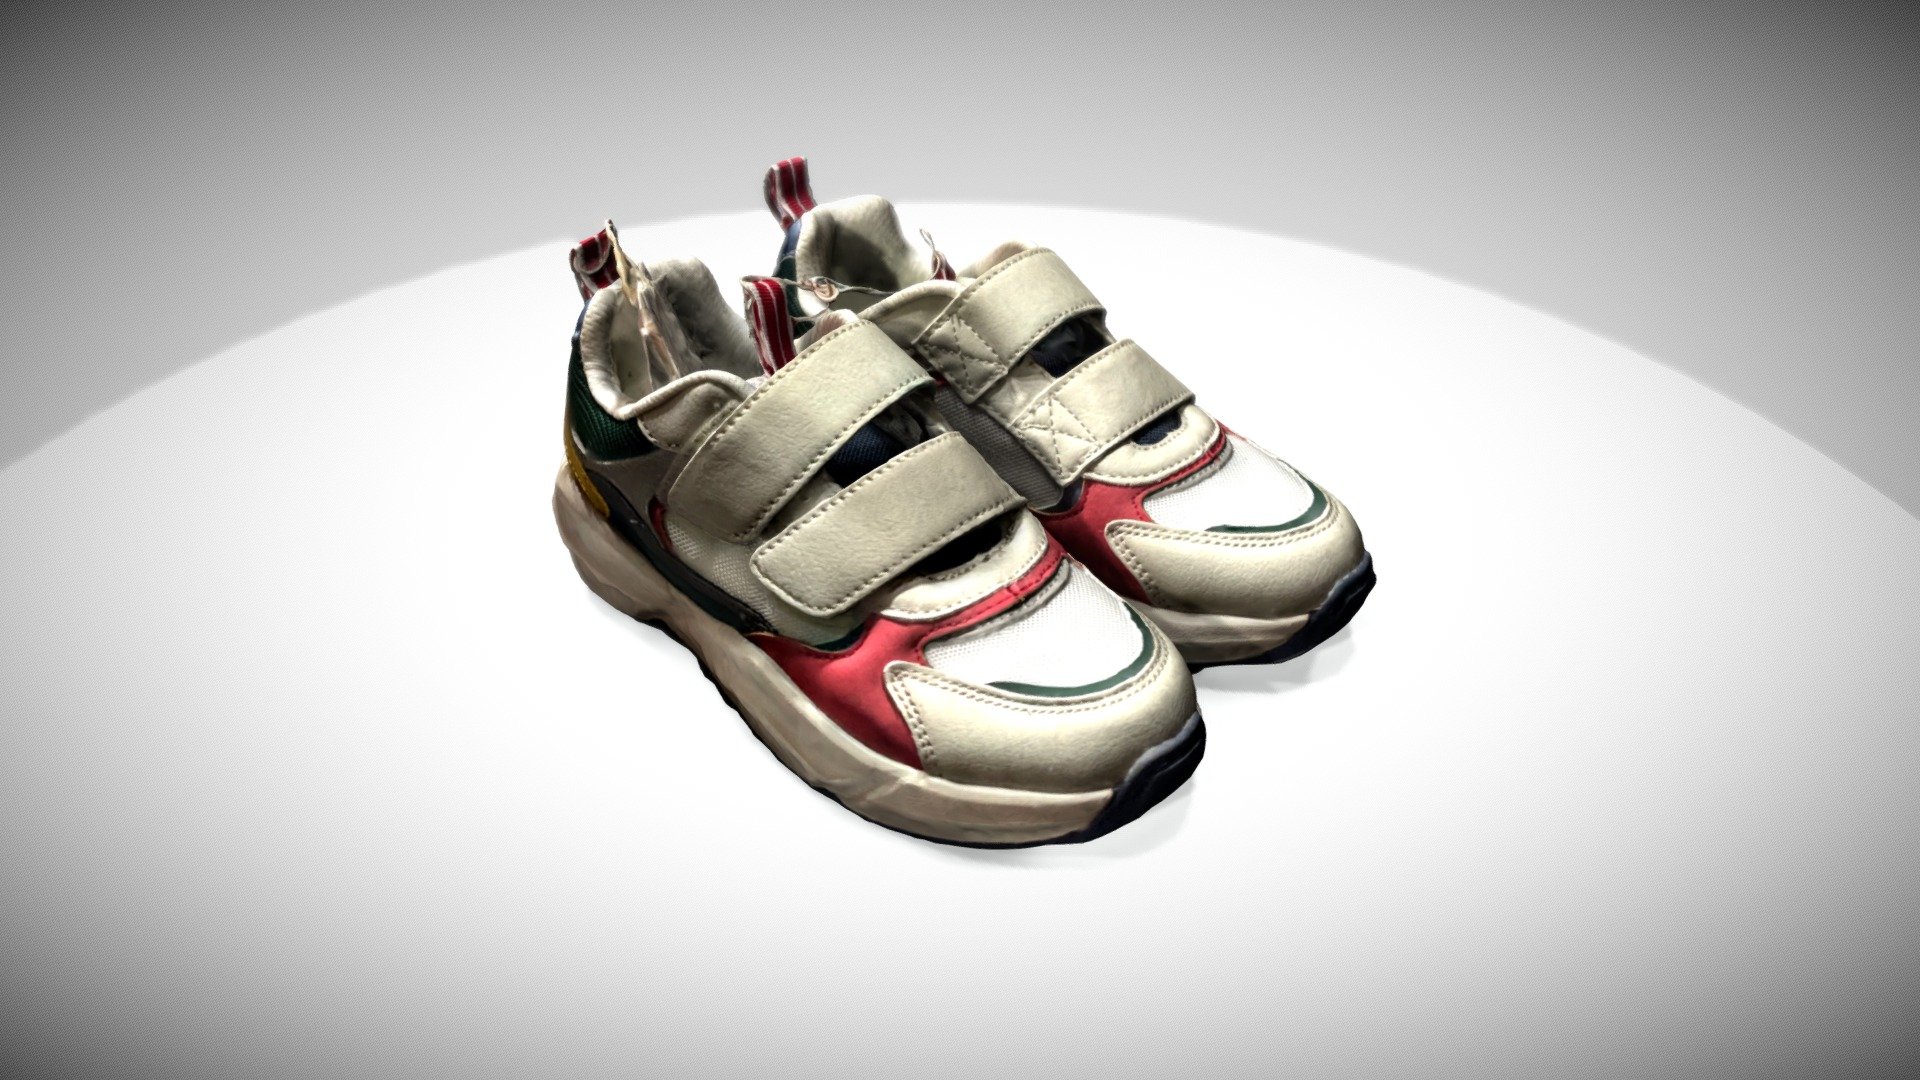 macOS12 Object Capture API with iPhone 12 Pro - Zara Kid's shoes - Download Free 3D model by DINKIssTyle (@NominPark) 3d model